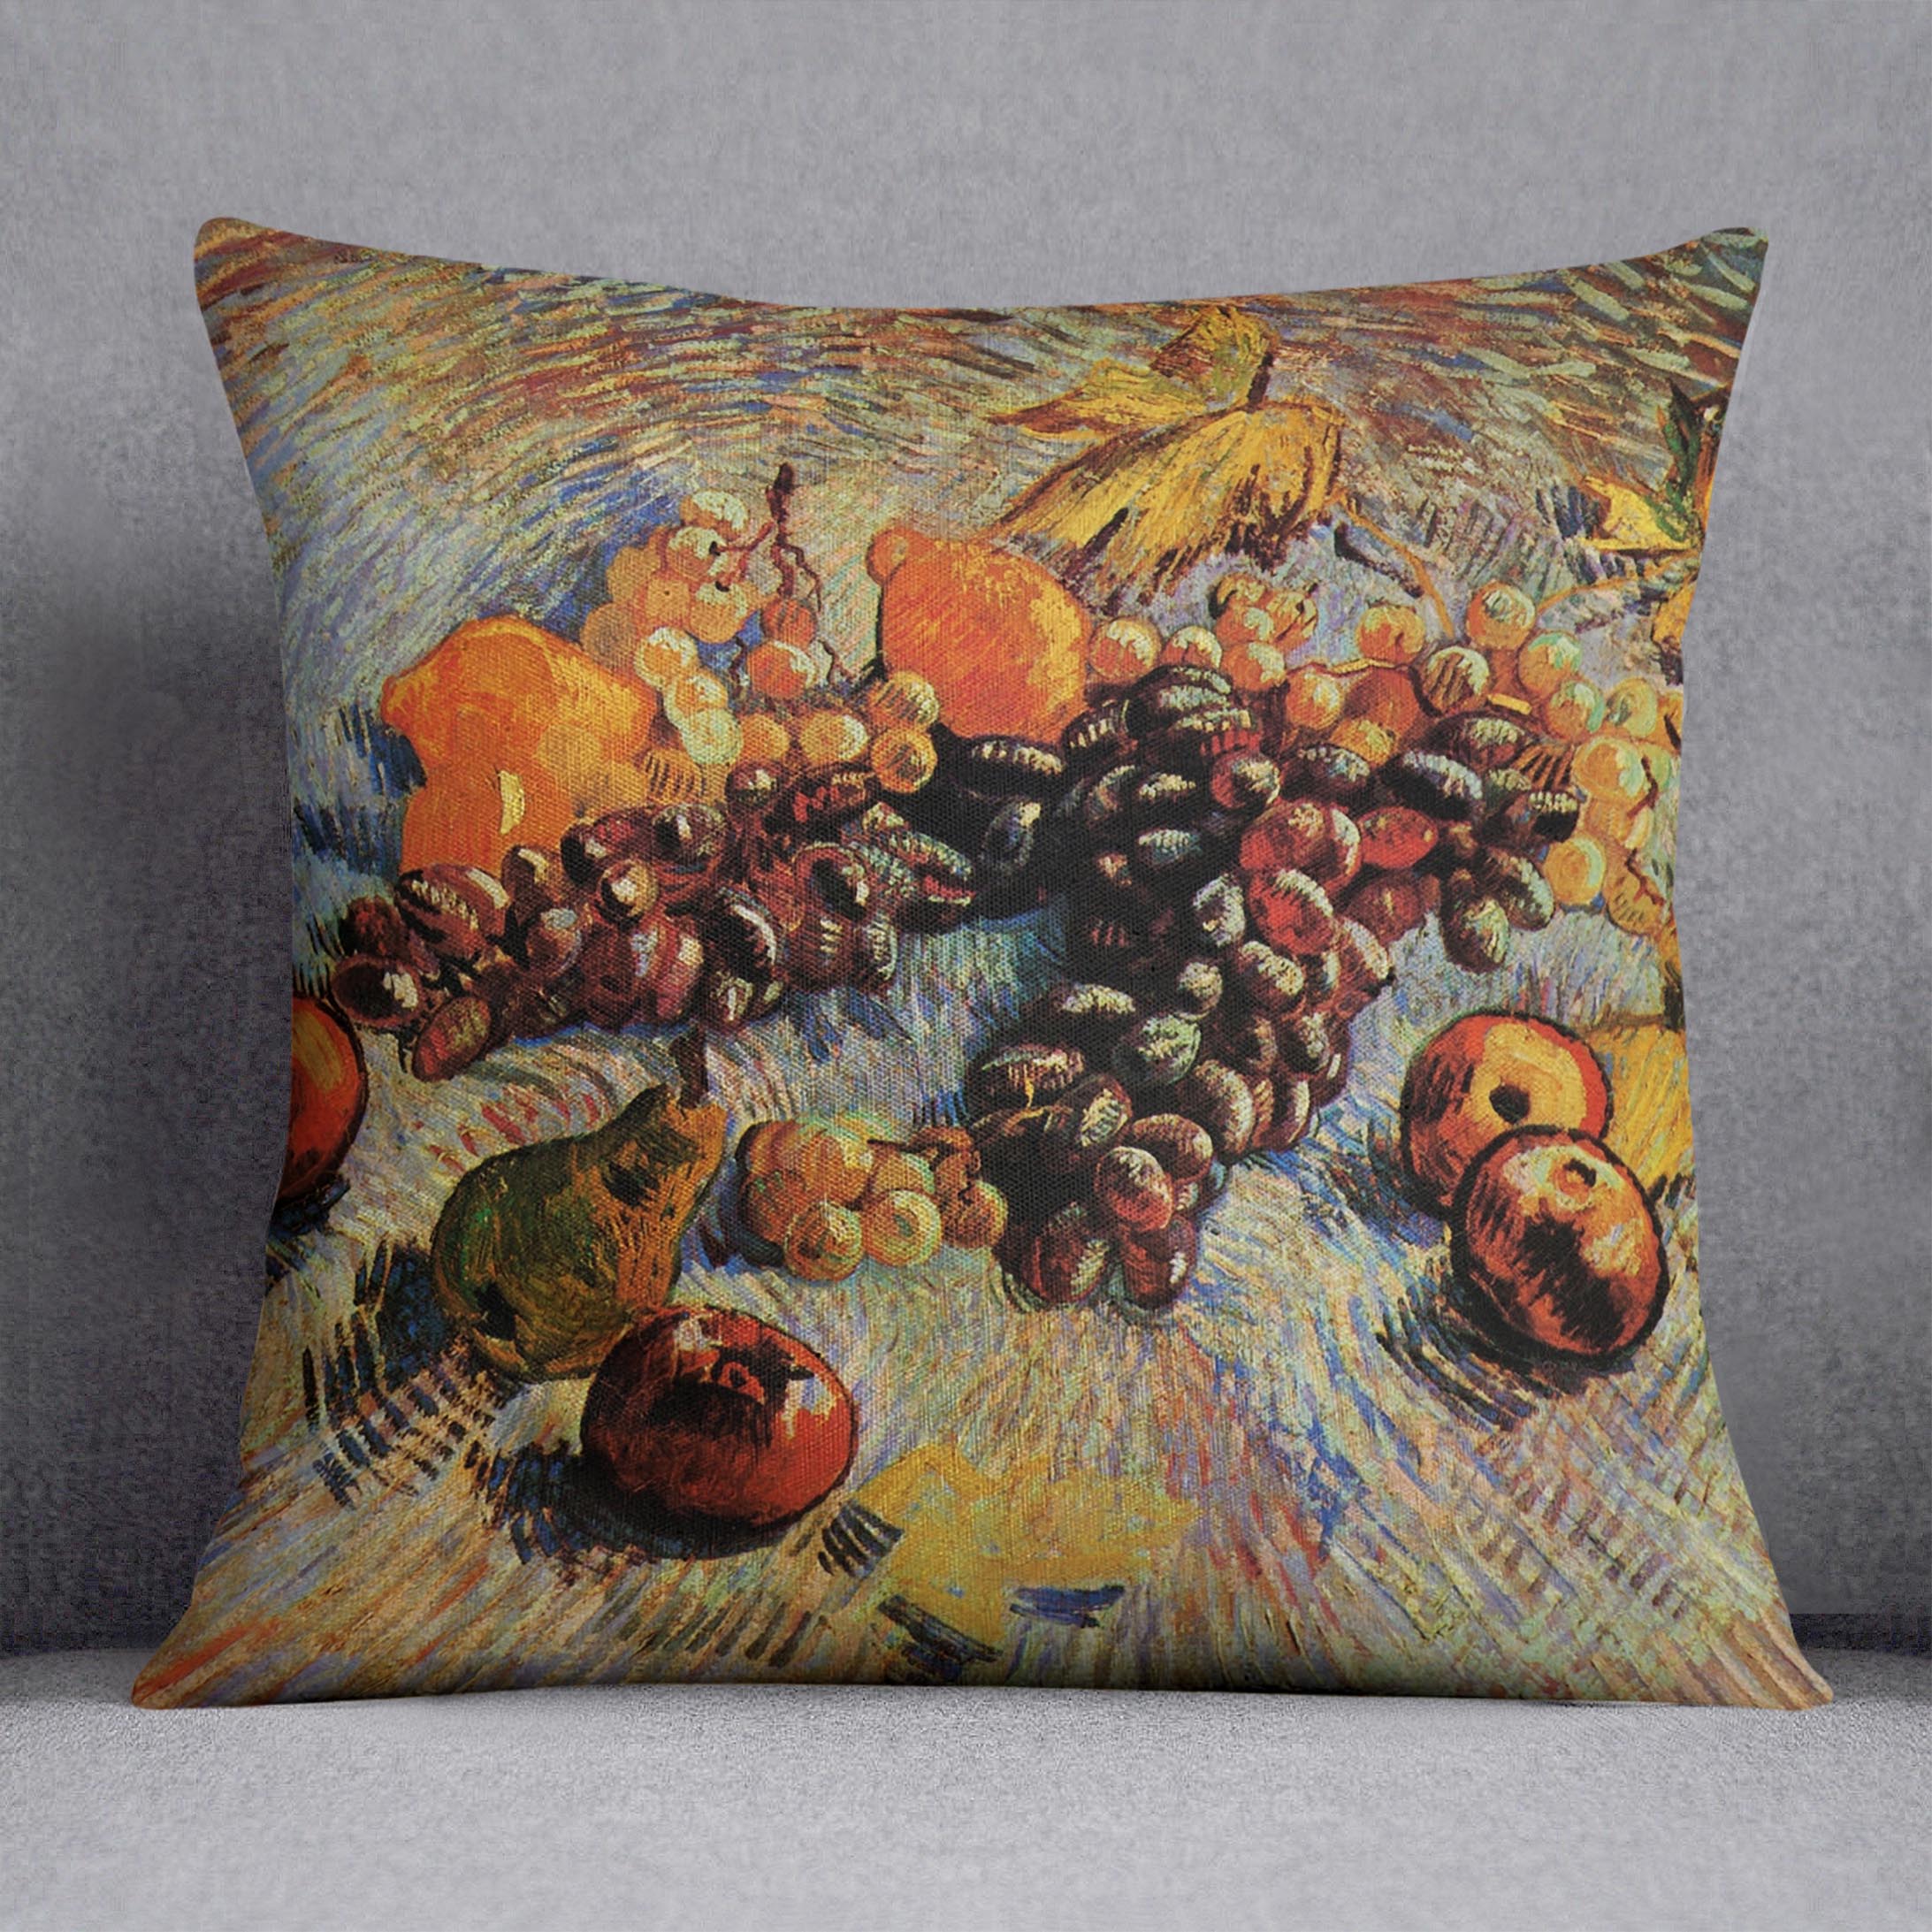 Still Life with Apples Pears Lemons and Grapes by Van Gogh Cushion